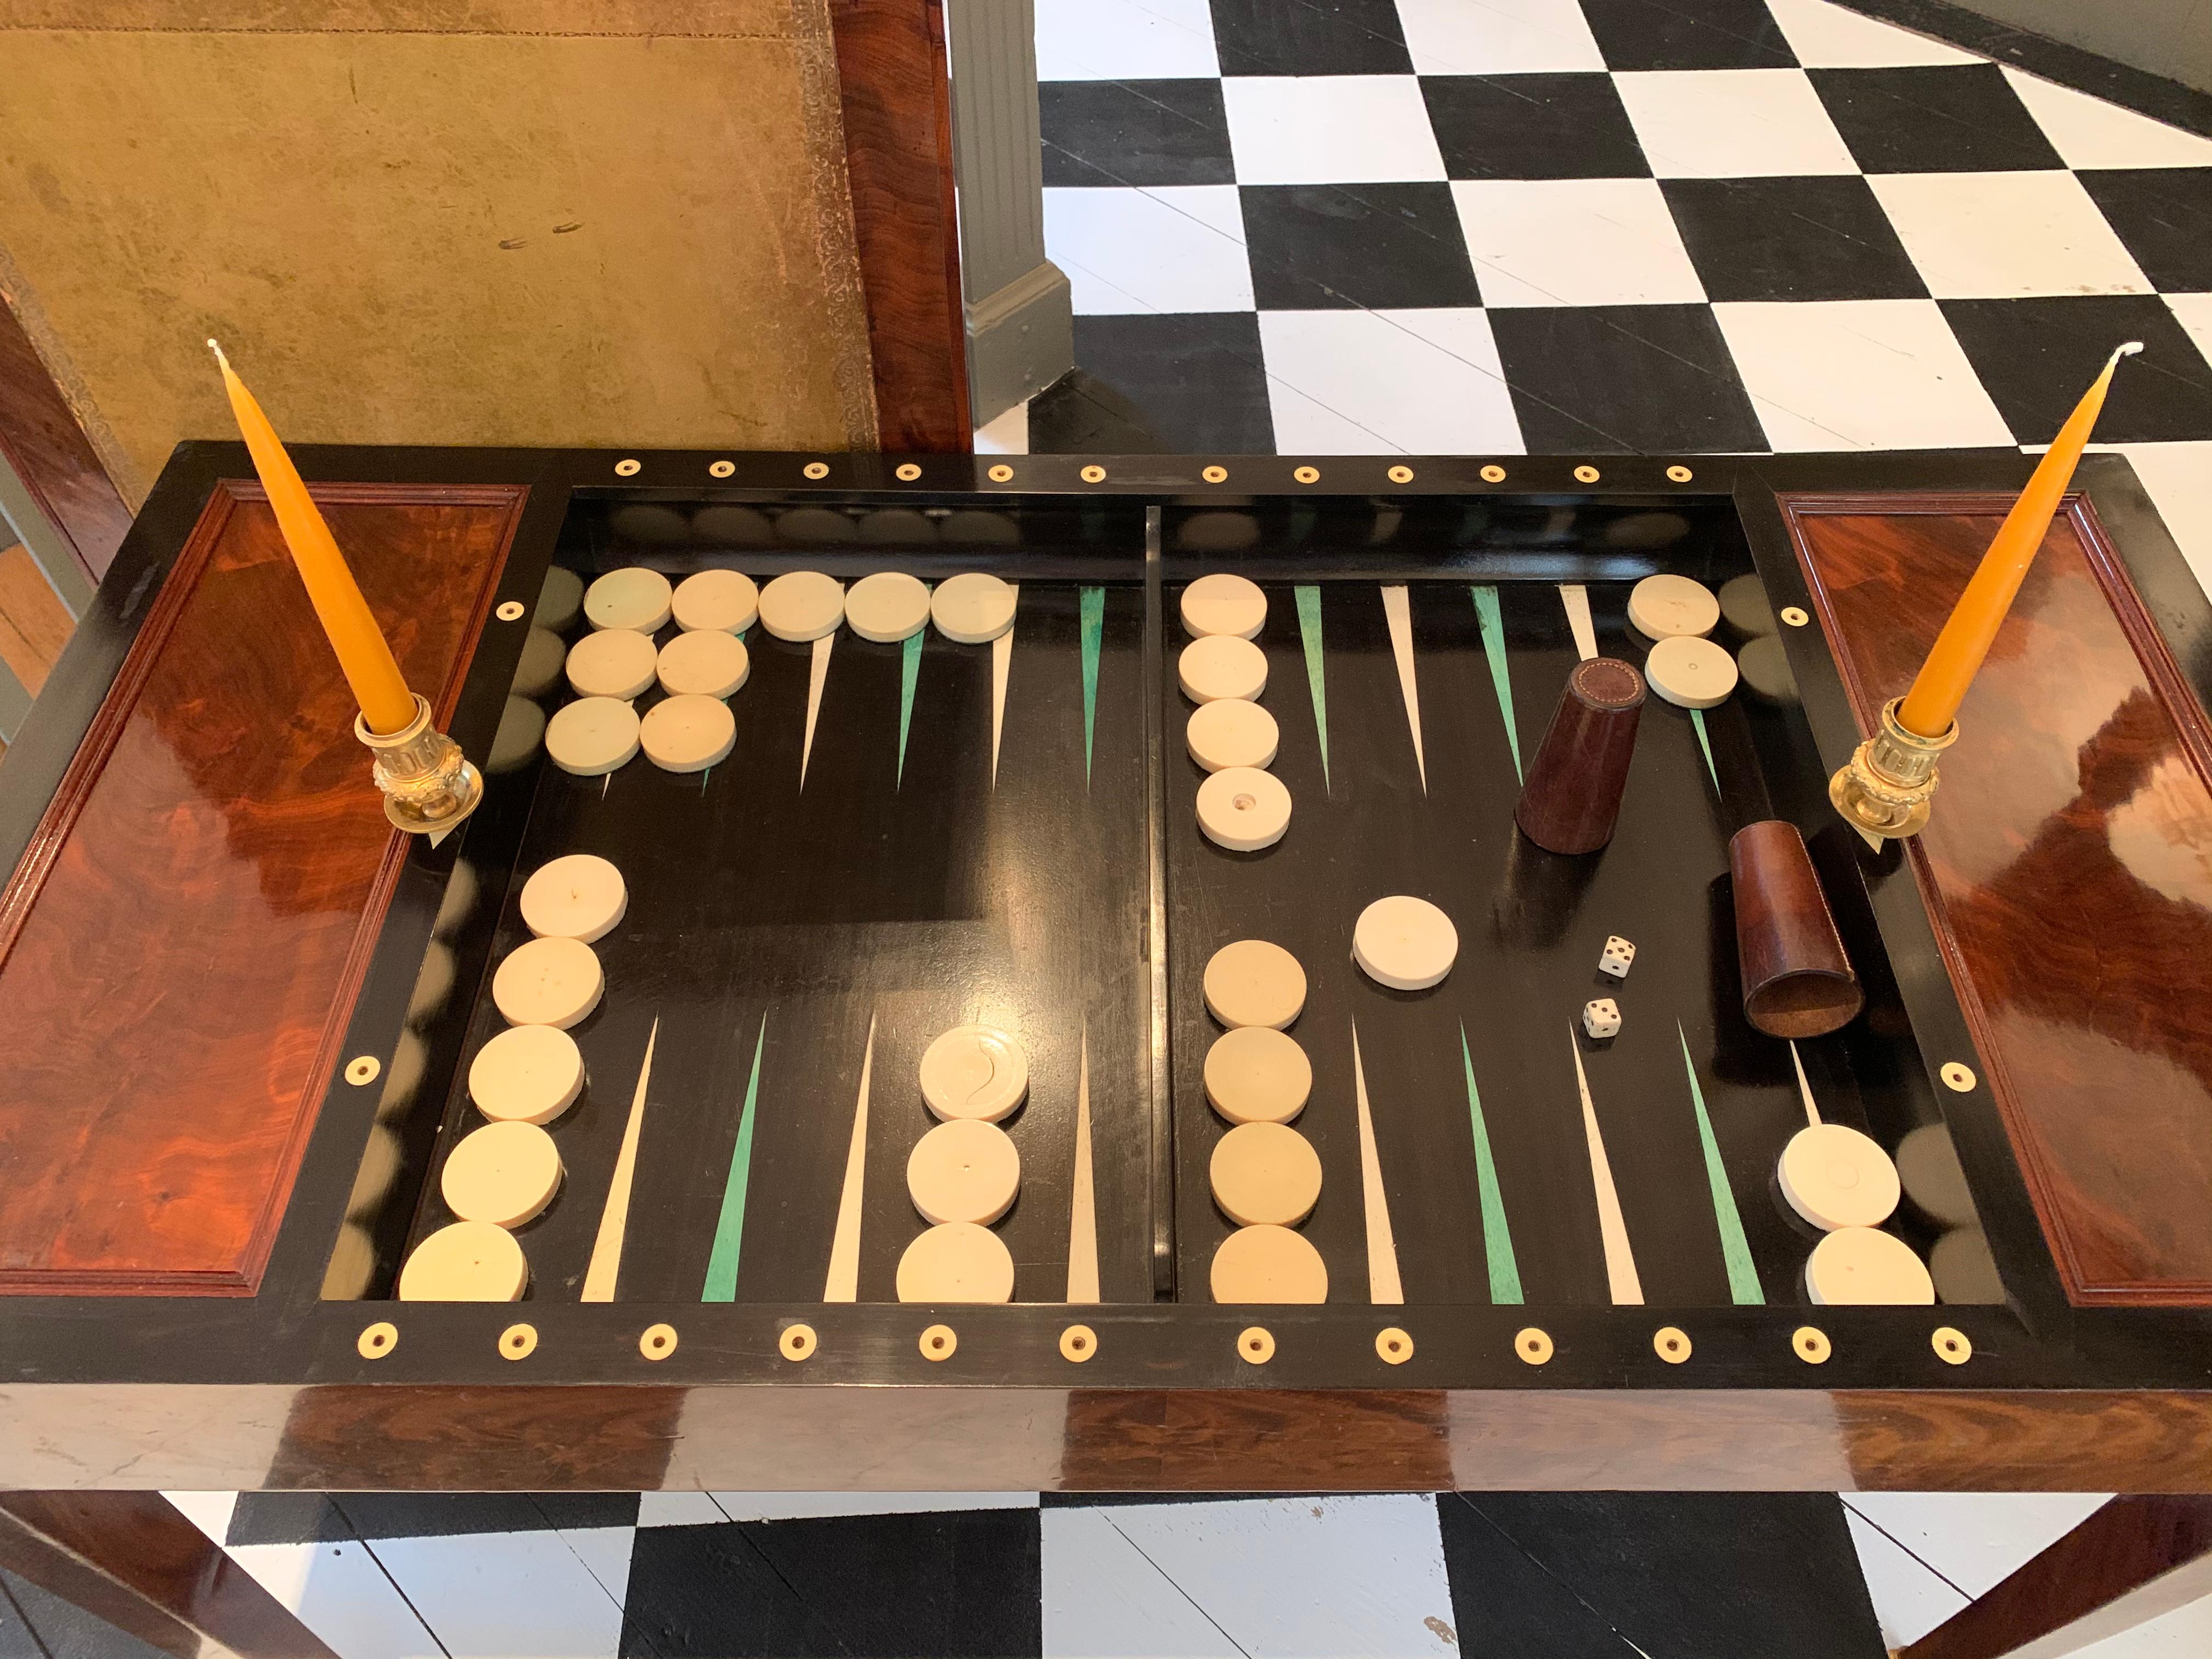 Early 19th century mahogany Tric-Trac or Backgammon table. Original base and leather covered top. Opens to reveal ebony and bone inlaid backgammon well. Draughts and Candlecups. Top flips to provide felt for card playing on one side and leather for